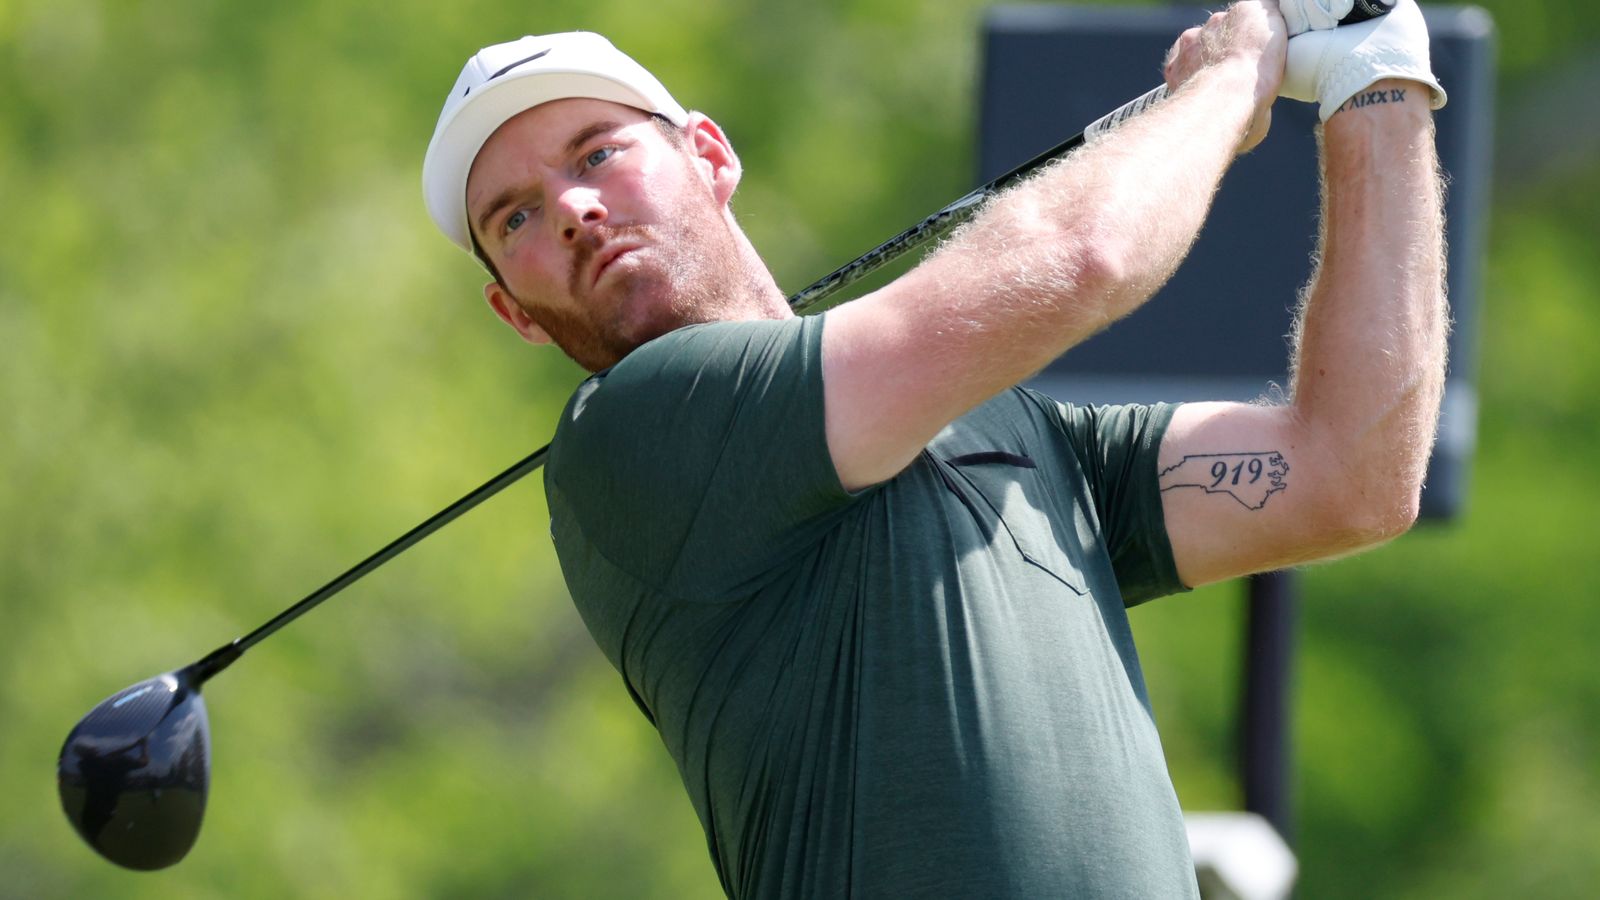 PGA Tour golfer Grayson Murray dies aged 30 a day after withdrawing from tournament